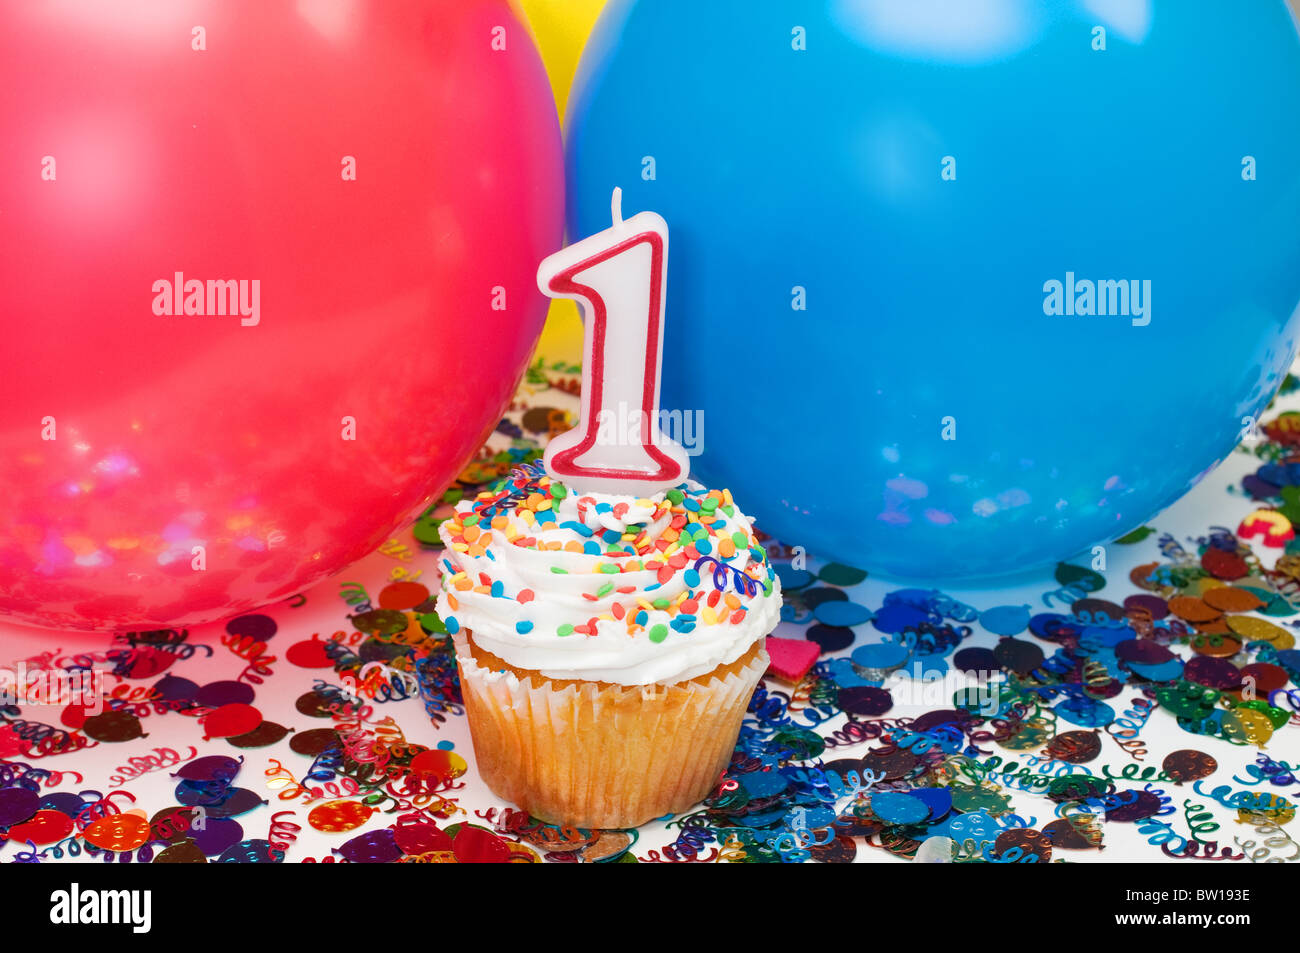 Celebration with balloons, confetti, cupcake, and number 1 candle. Stock Photo